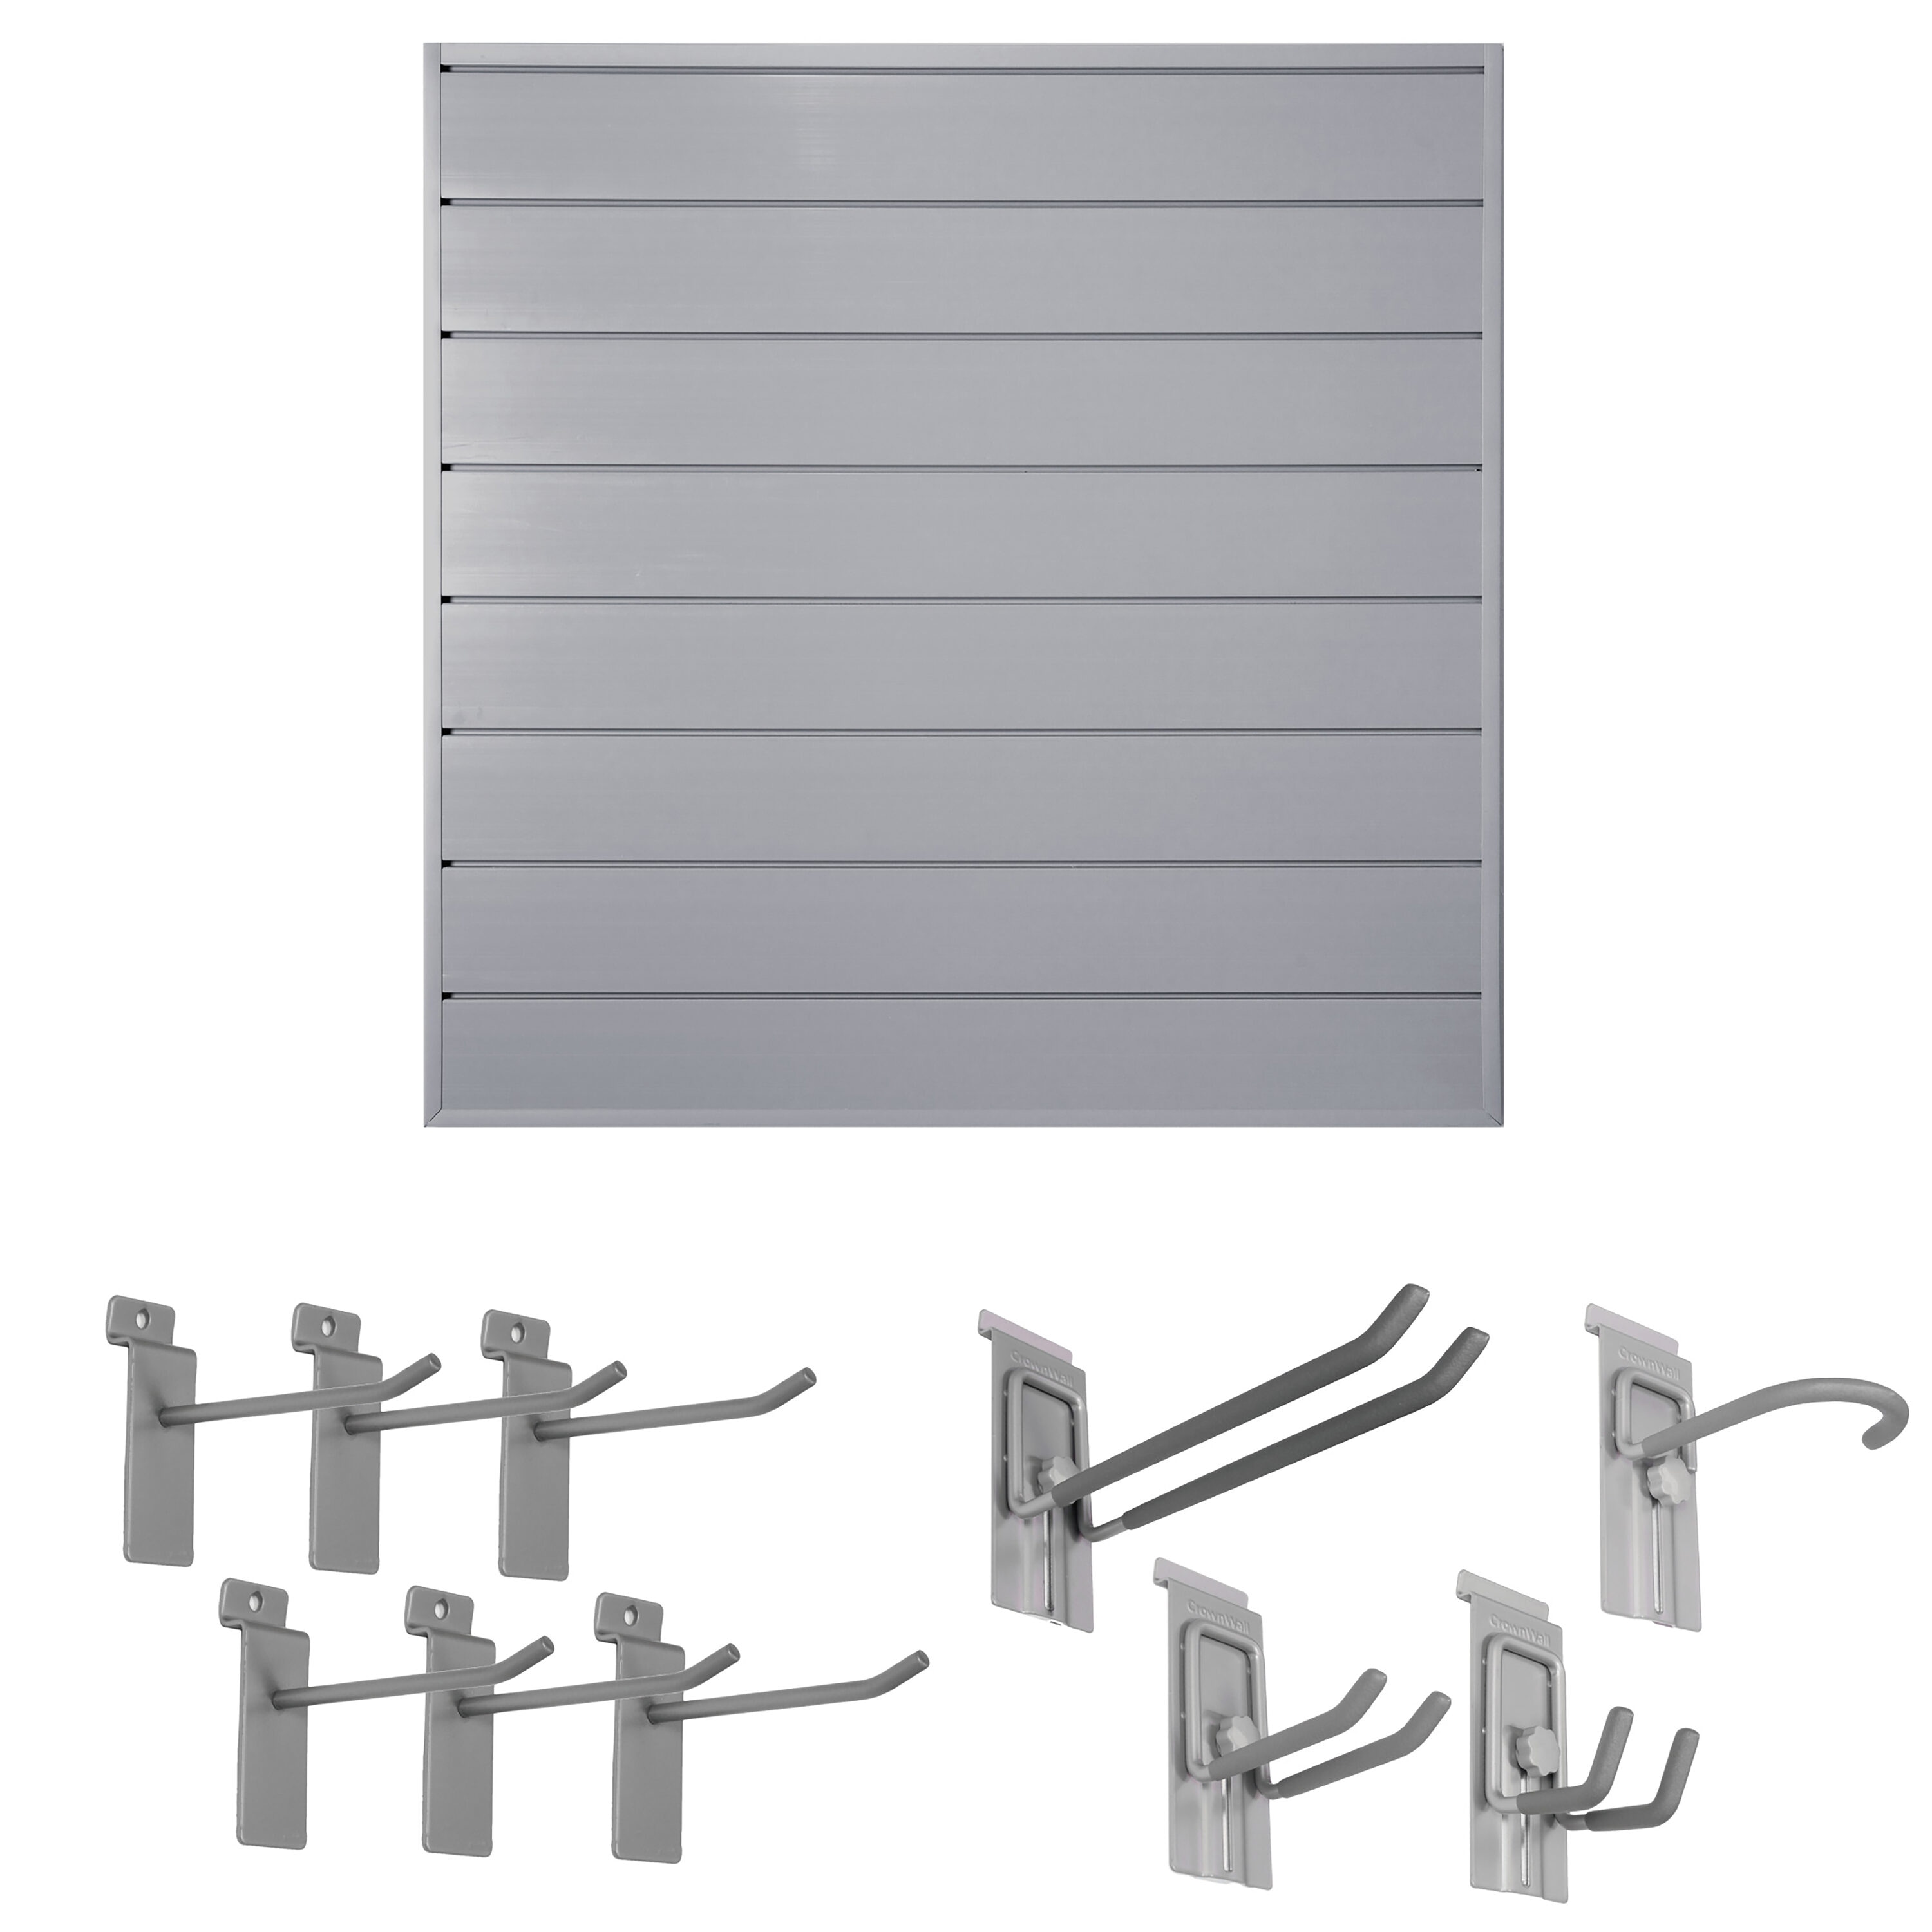 CrownWall 48 in. H x 48 in. W Starter Bundle PVC Slatwall Panel Set with  Locking Hook Kit in Graphite (10-Piece) in the Slatwall  Rail Storage  Systems department at